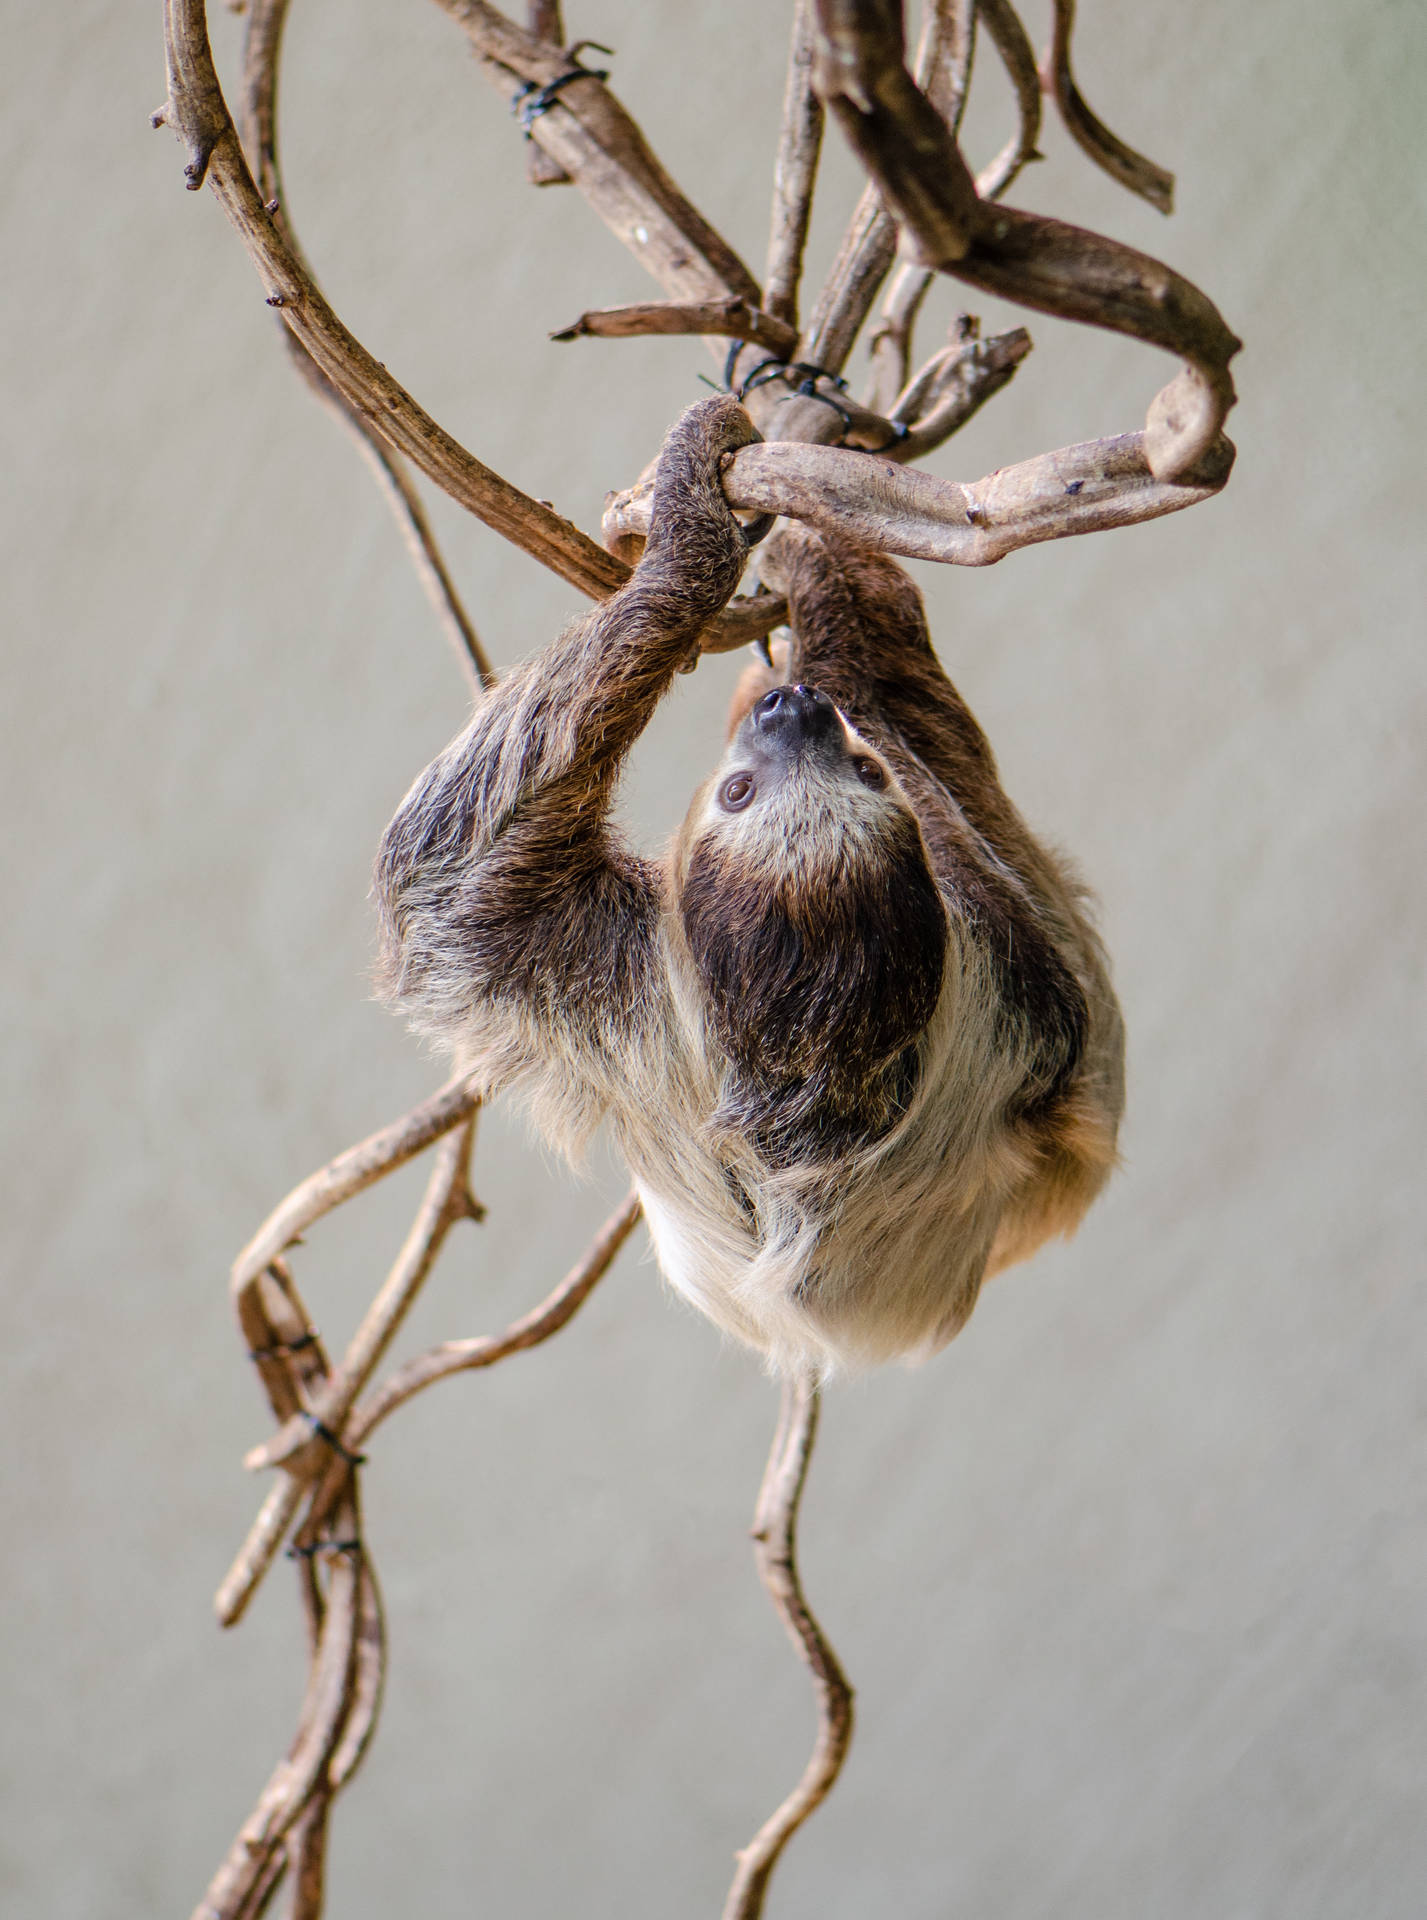 Sloth 3039X4088 Wallpaper and Background Image